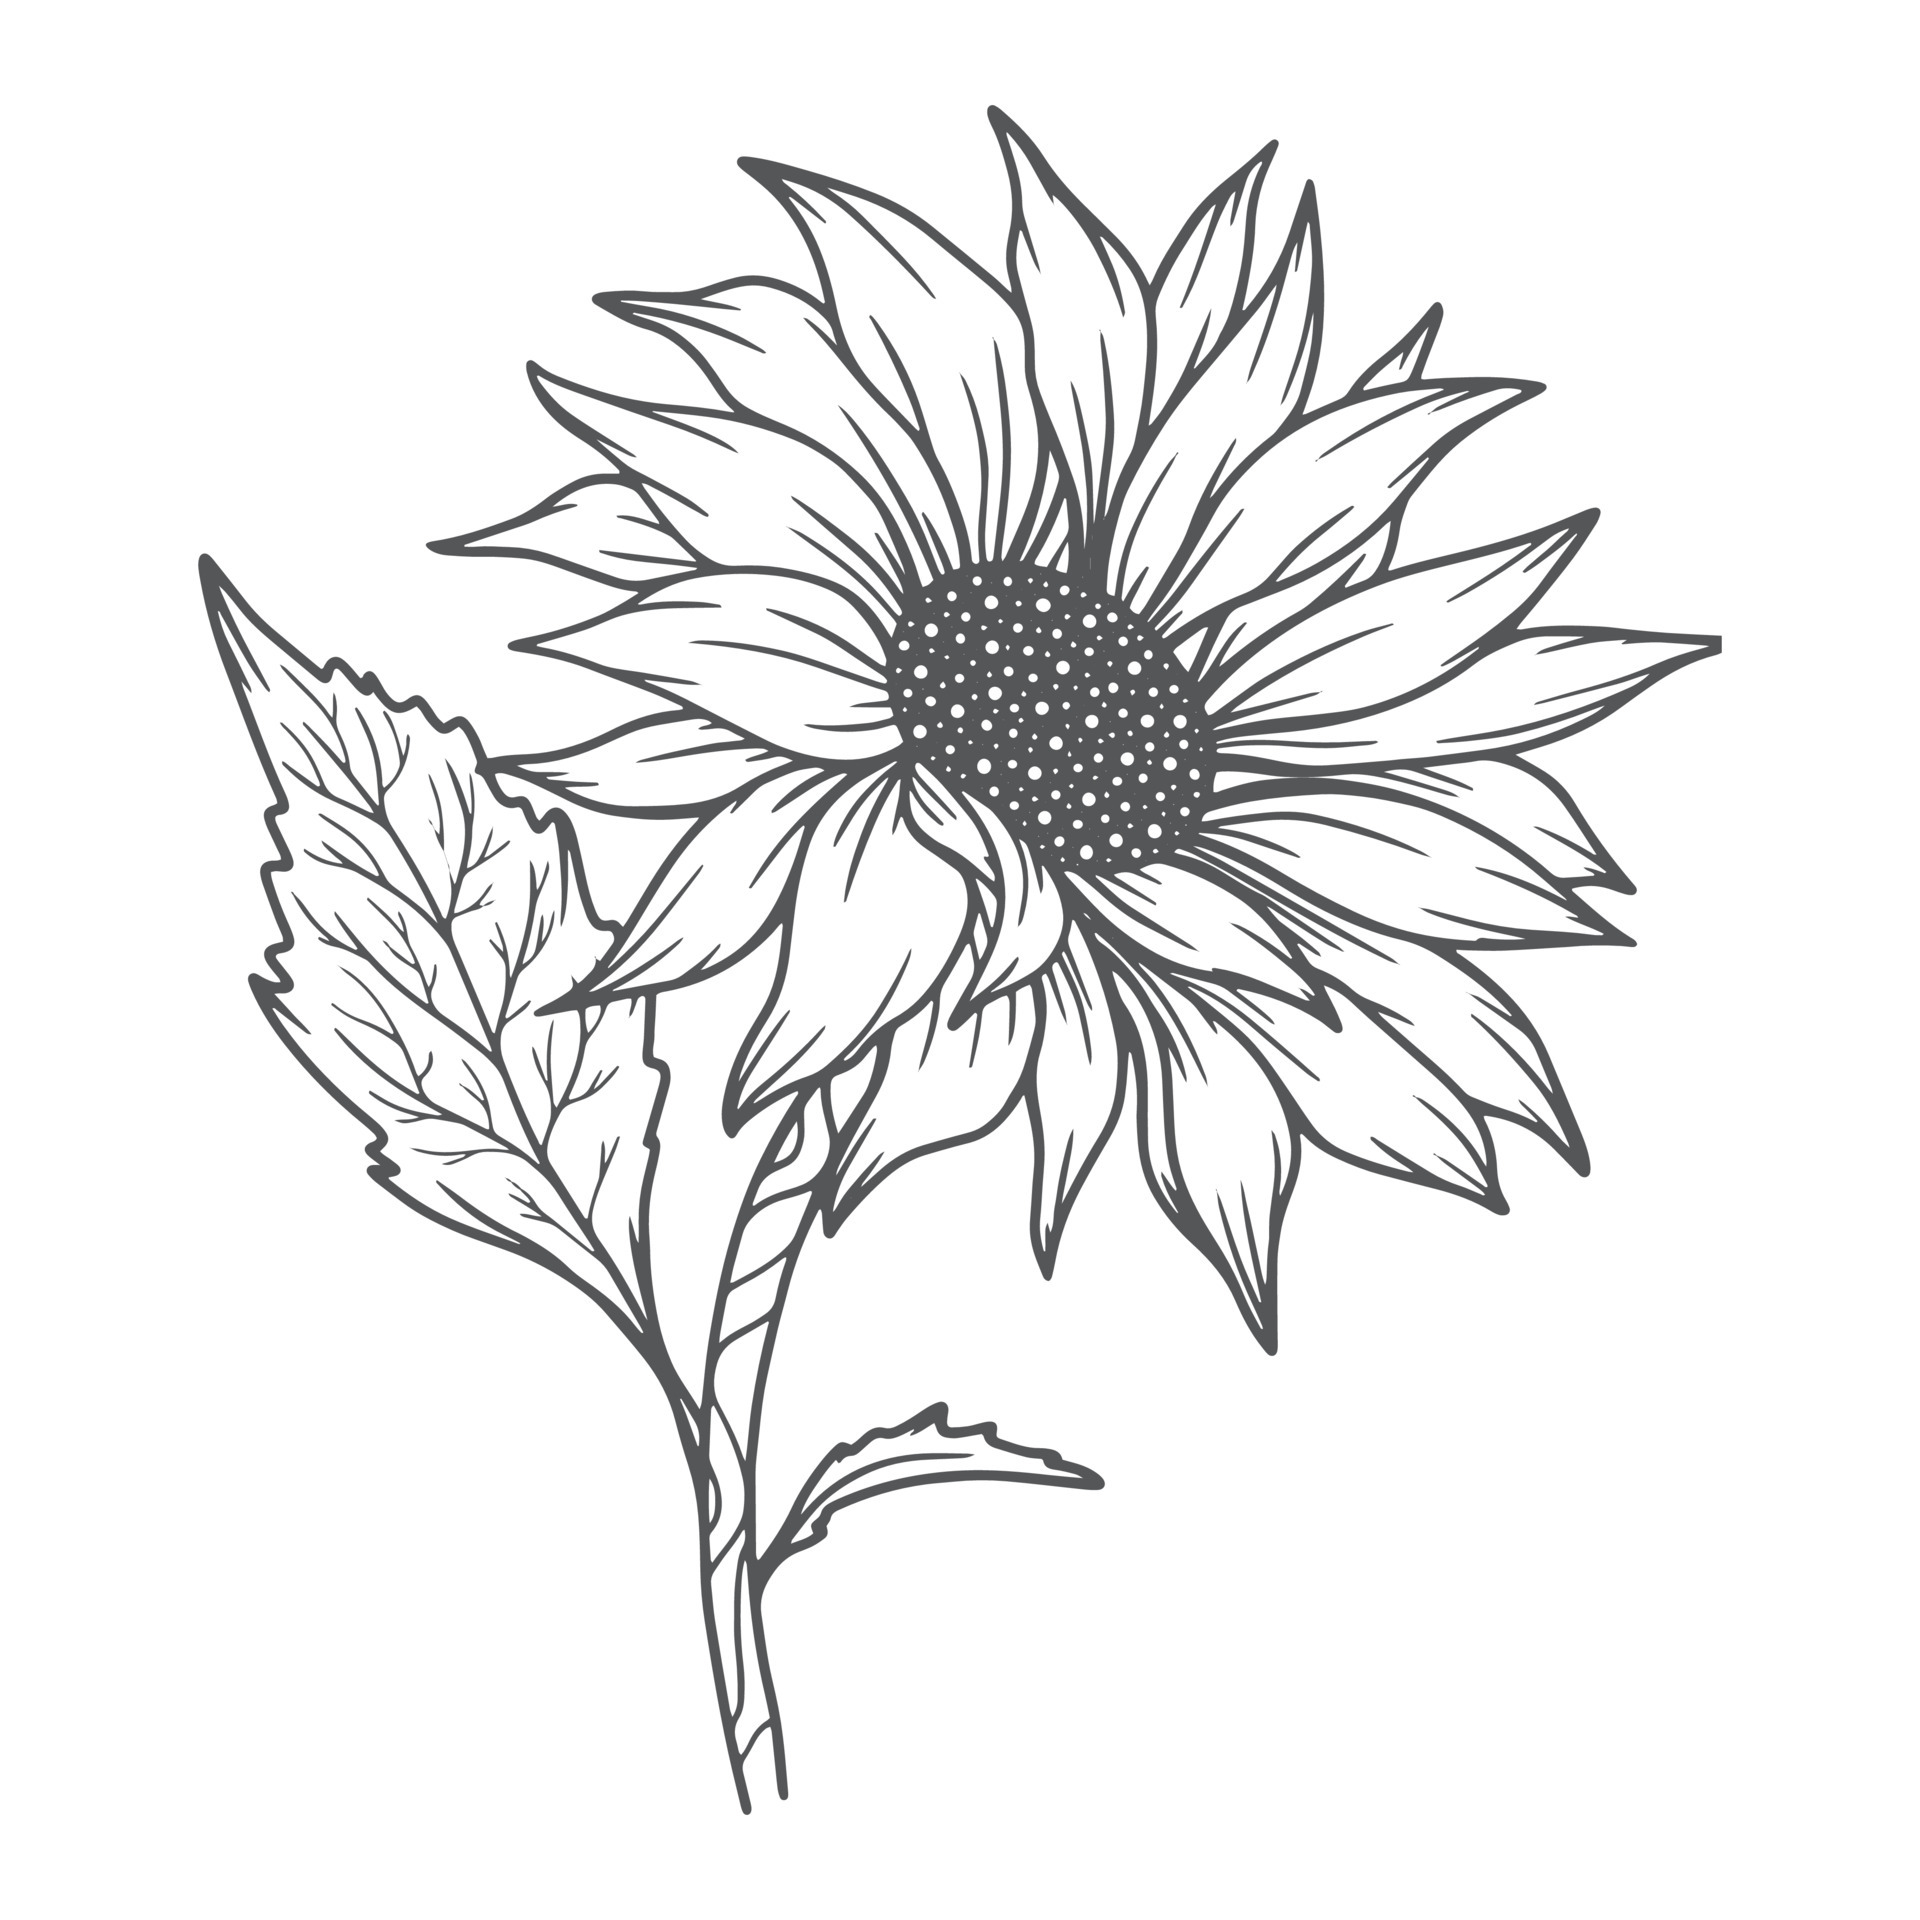 Sunflower Outline Drawing